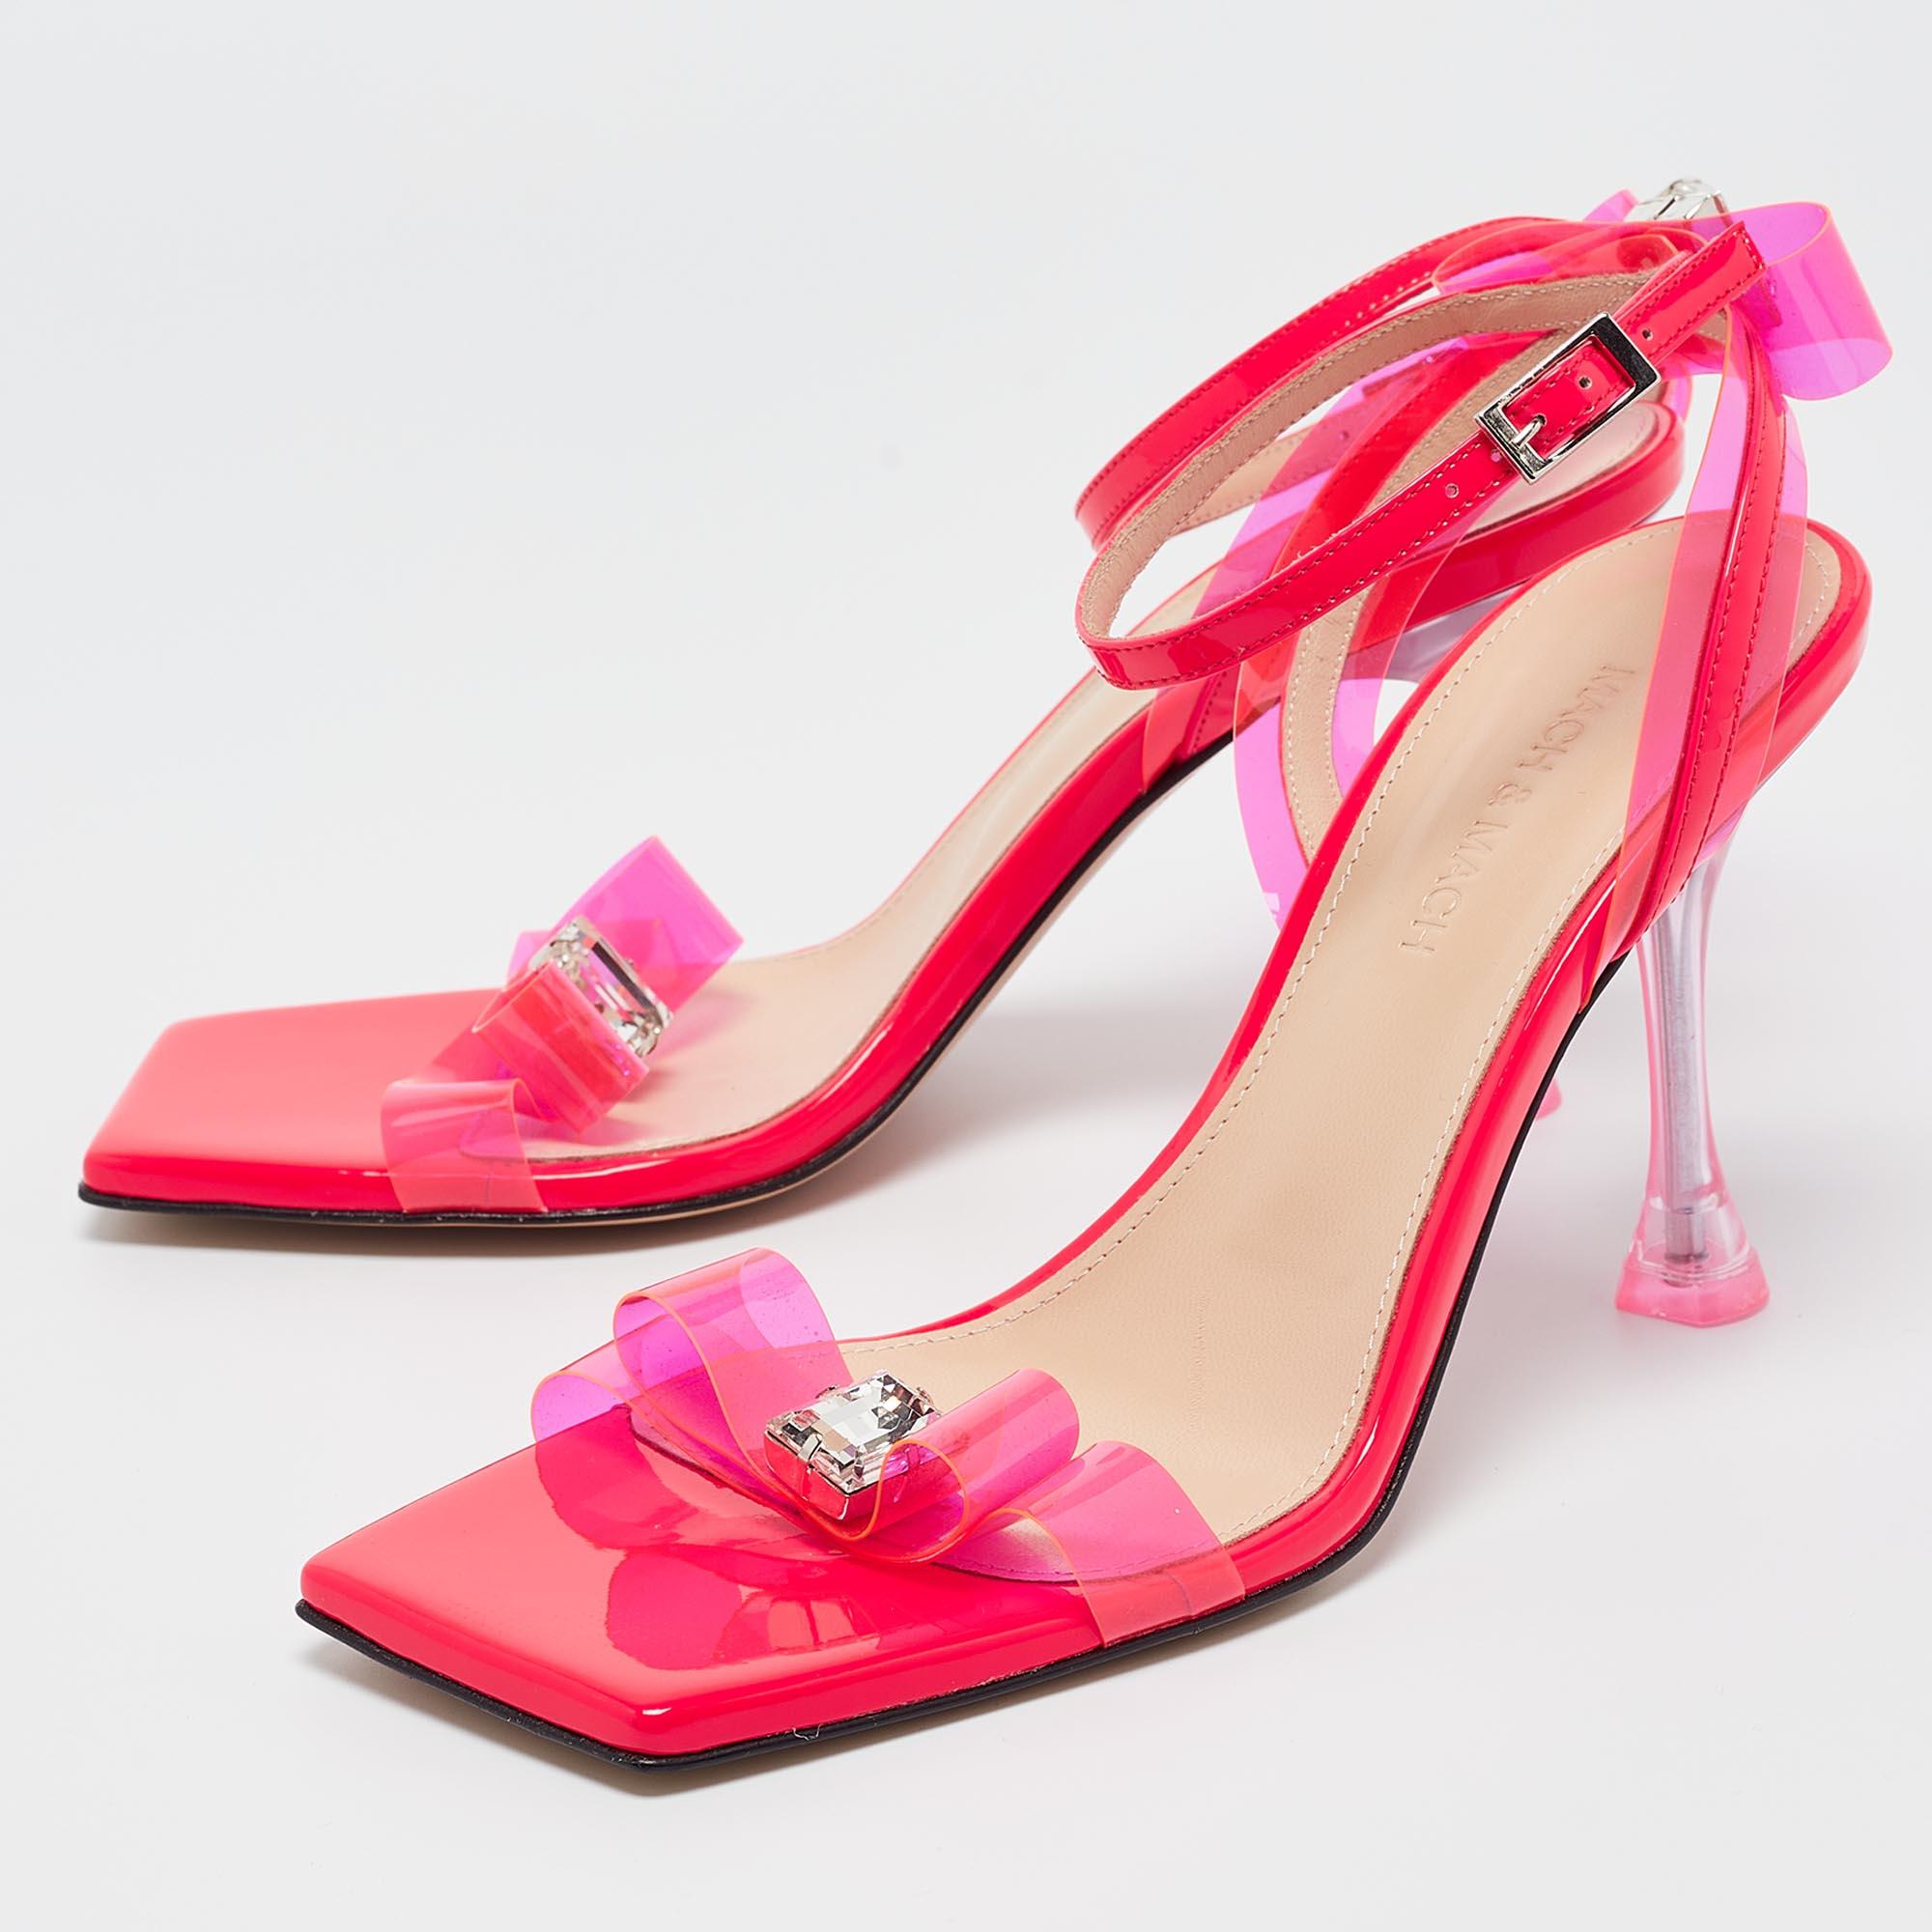 Mach & Mach Pink PVC and Patent French Bow Sandals Size 38.5 For Sale 6